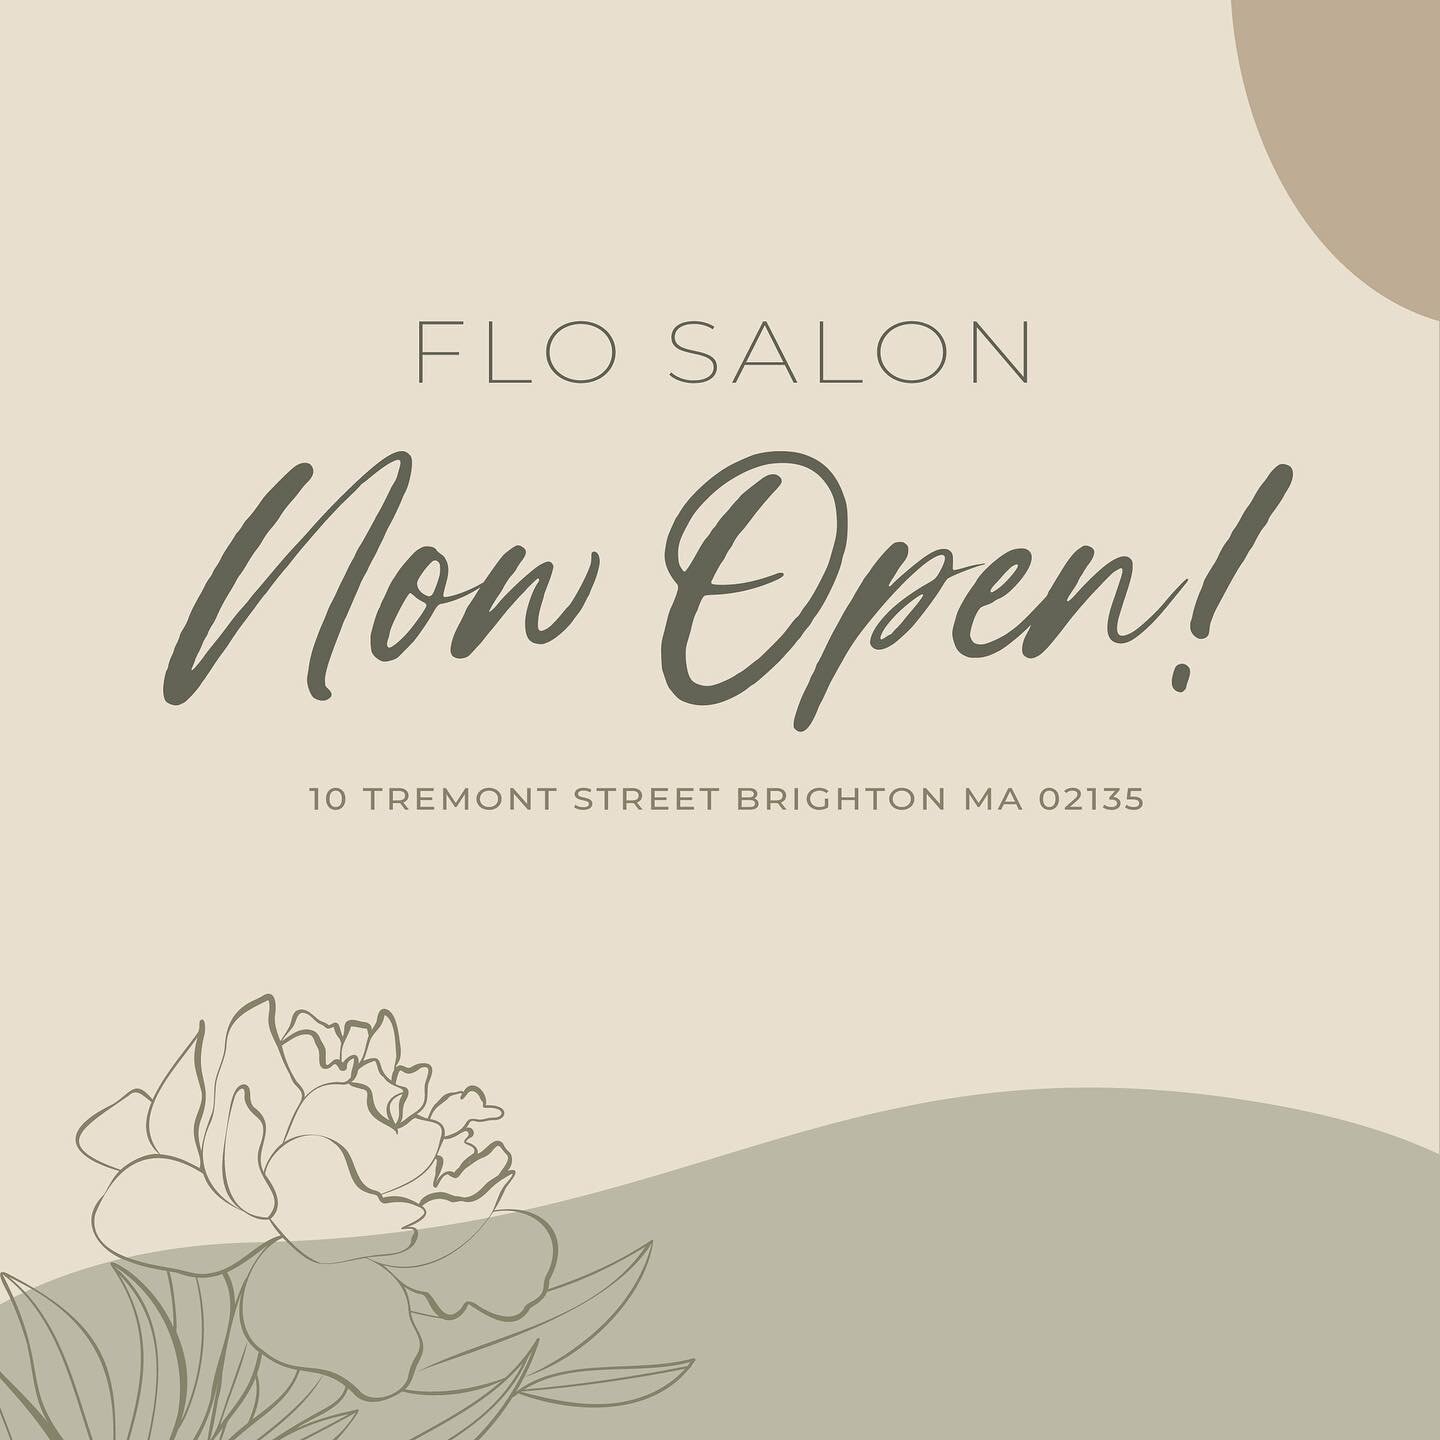 Doors are officially open at FLO SALON and we are over the moon!✨🍾 Feeling so grateful &amp; excited to share this beautiful space with you! THANK YOU to all of my clients, friends, family, vendors and our new neighborhood. Look forward to seeing yo